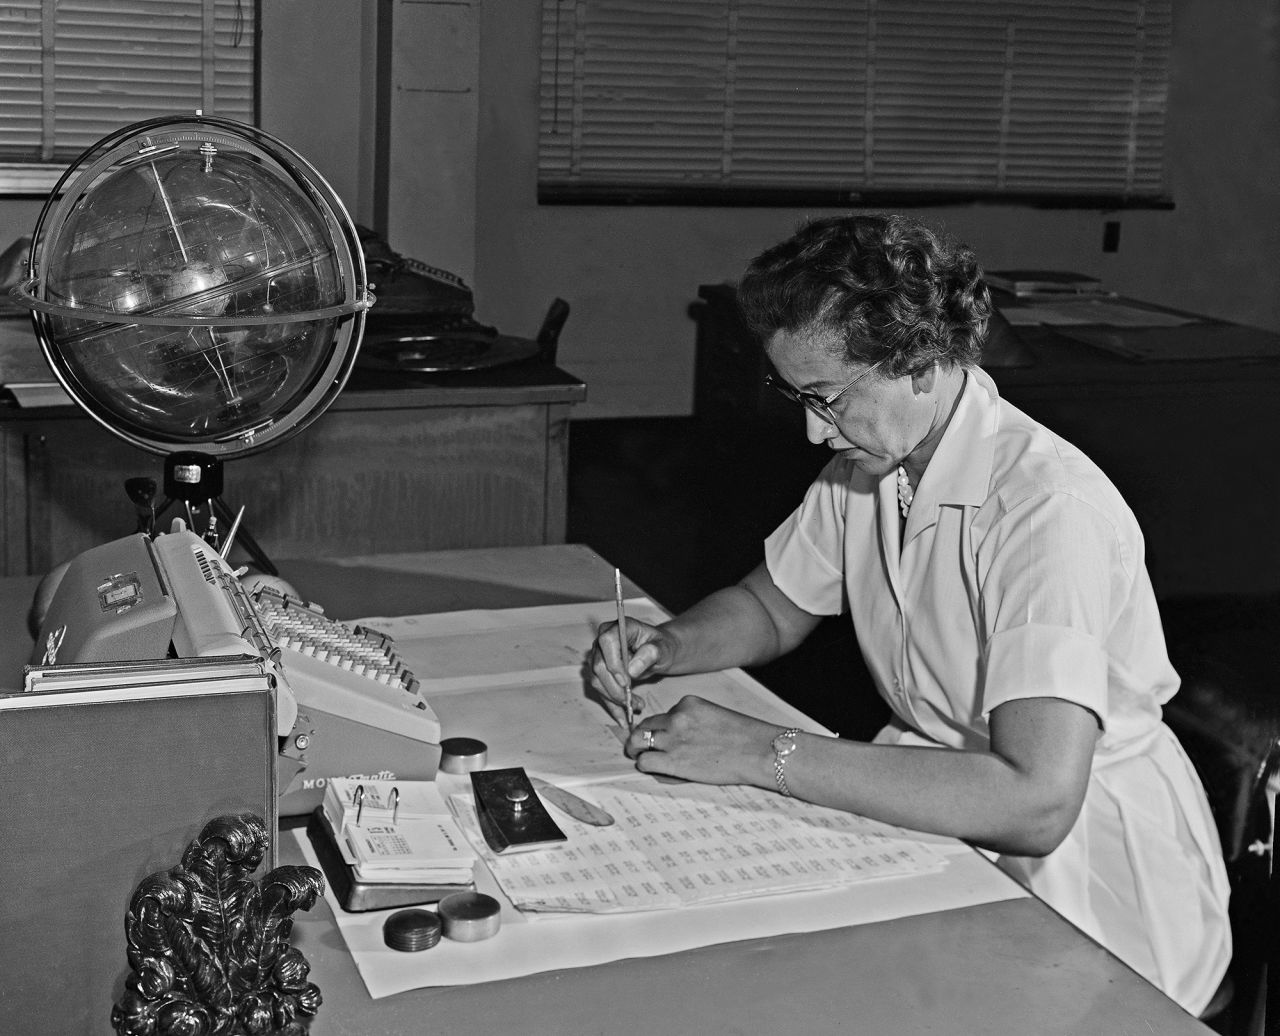 Pioneering mathematician Katherine Johnson poses at her desk at NASA's Langley Research Center in Hampton, Virginia, in 1962. Johnson was part of NASA's "computer pool" — a group of mathematicians whose calculations powered NASA's first successful space missions. Her work, and the work of several other Black female employees, helped launch America's first manned trip to space. Their work was long overlooked until the 2016 novel and movie "Hidden Figures" brought their stories into the spotlight. 